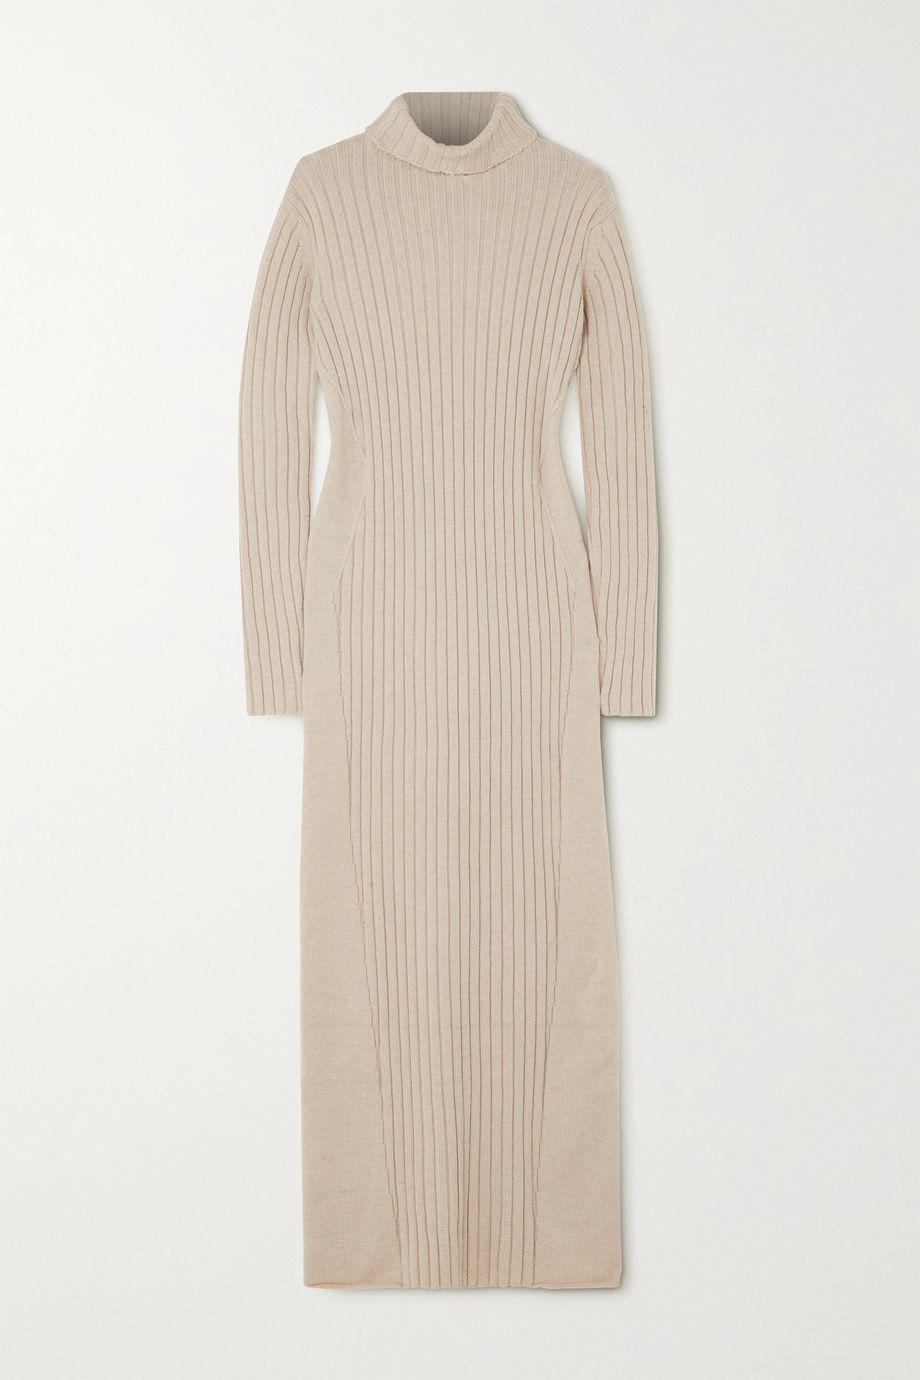 Paneled ribbed wool turtleneck maxi dress by CAES